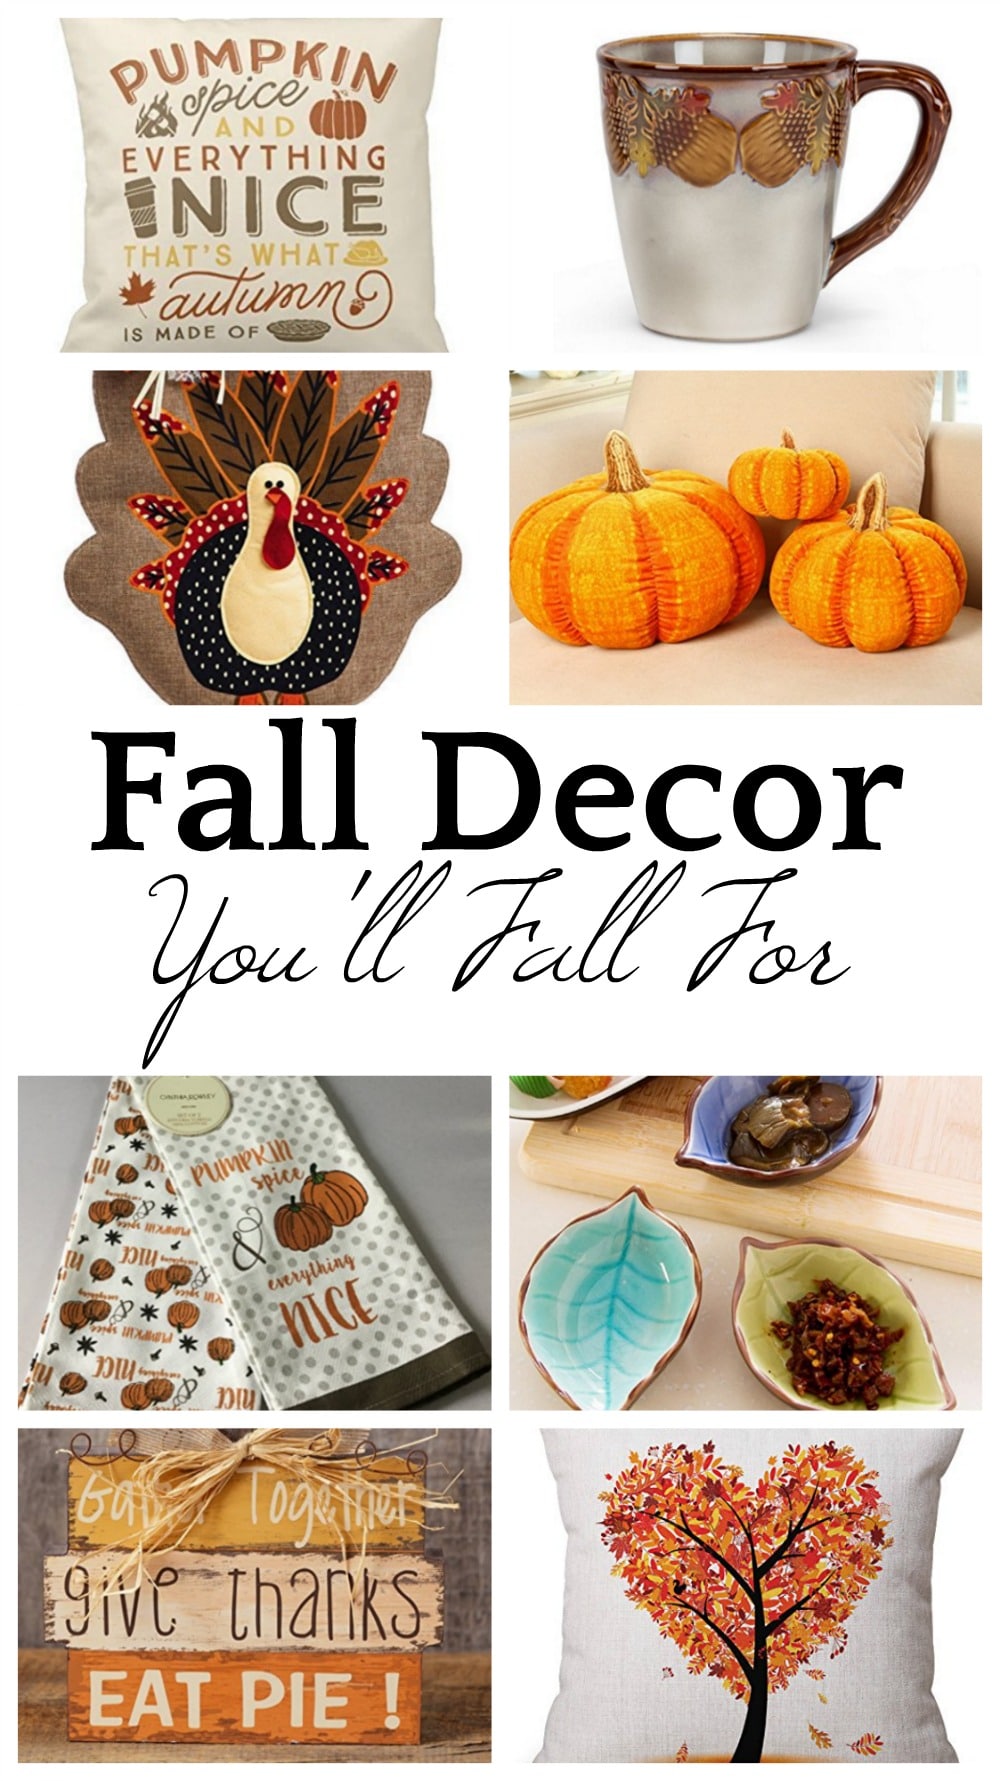 Fall Decor You'll Fall For